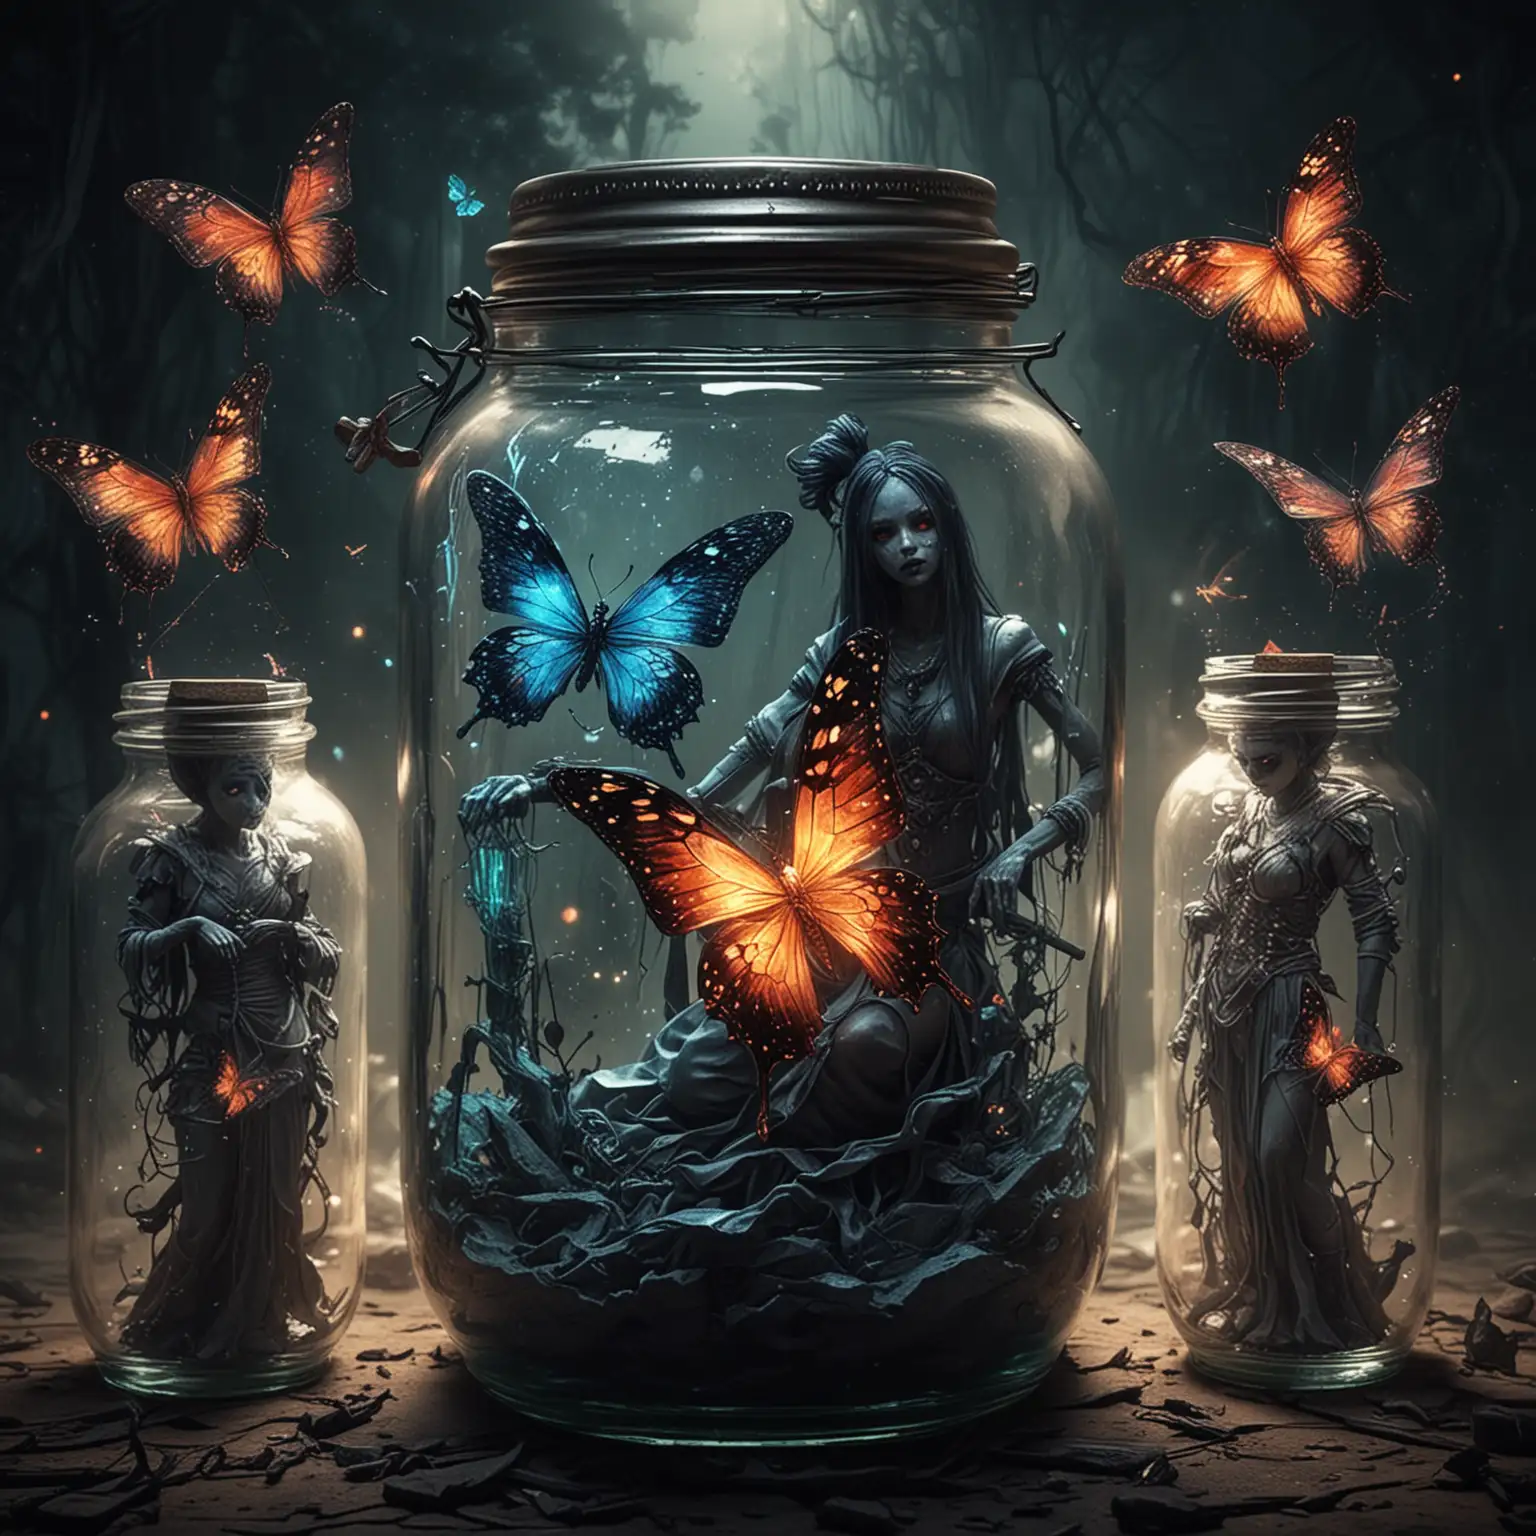 ((((glowing poisonous butterflies jar)))),the quantum panderverse is a decaying reality where forced inclusion is a poison that assumes everything should be made colorful like a circus, because they assume everything is like them and should be like them. Since impressionism and expressionism, the corrupted idea of freedom is a concept that creates war, becoming the true apocalypse of modernity. Only a few dare to fight the tricky dementors who feed from other emotions like astral specters; these faceshift and disguise themselves as warriors, elves, dark elf,witches, fairies, mermaids,animals,birds,bugs,beast,unicorns,dragons,symbols,victims,demons,angels,woman,creatures,gods,religion,aliens,superheroes,knights,tarot,geishas,princess,jokers,ghouls,influencers,characters,avatars,bad modetaros,etc,stay away from internet is toxic, they can't win without cheating, it damages your neurosynaptic networks and fries your brain